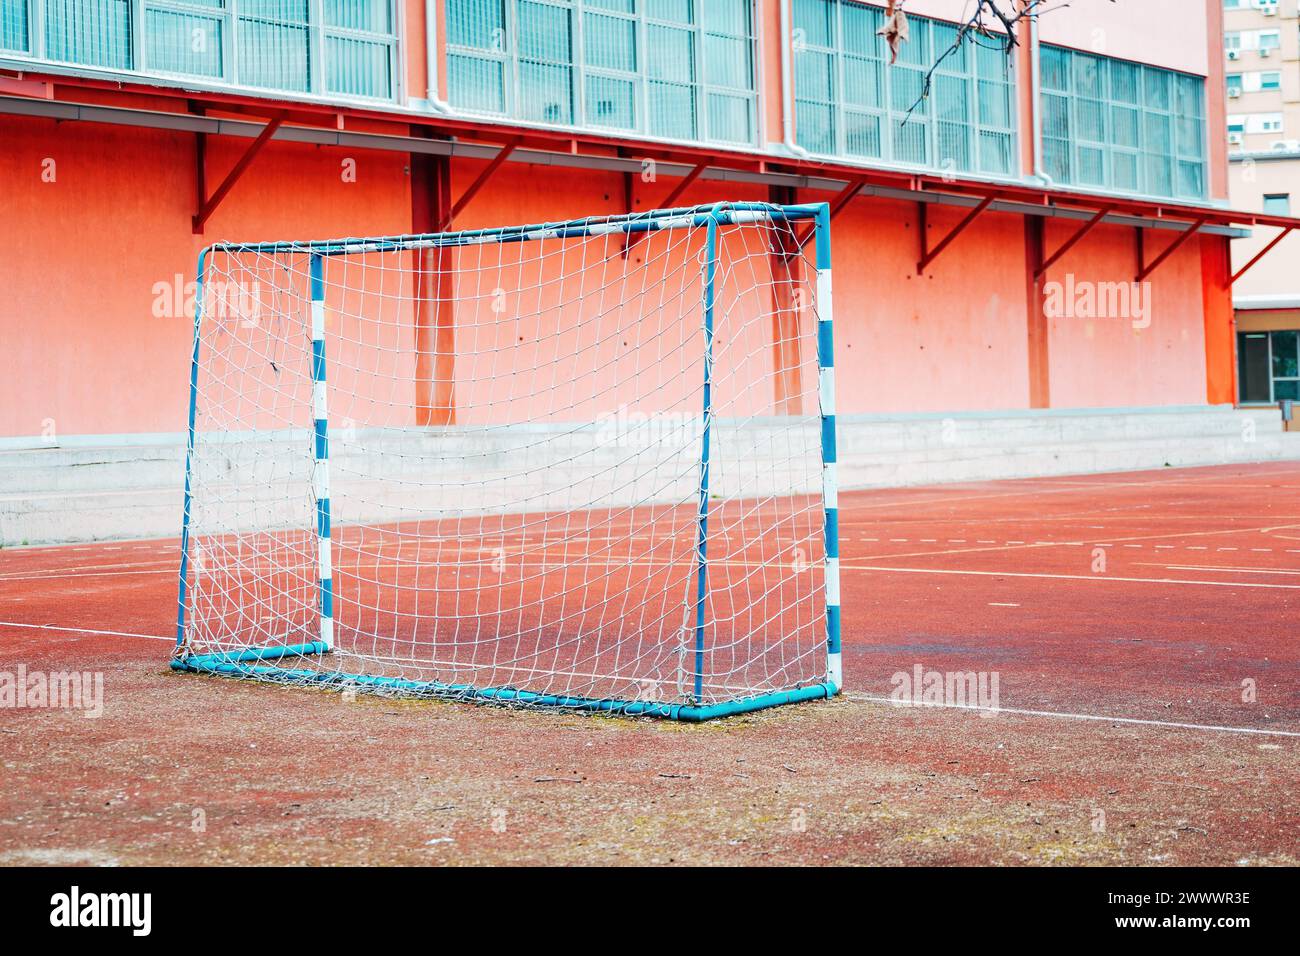 Handball goal on outdoor pitch in school playground, selective focus Stock Photo